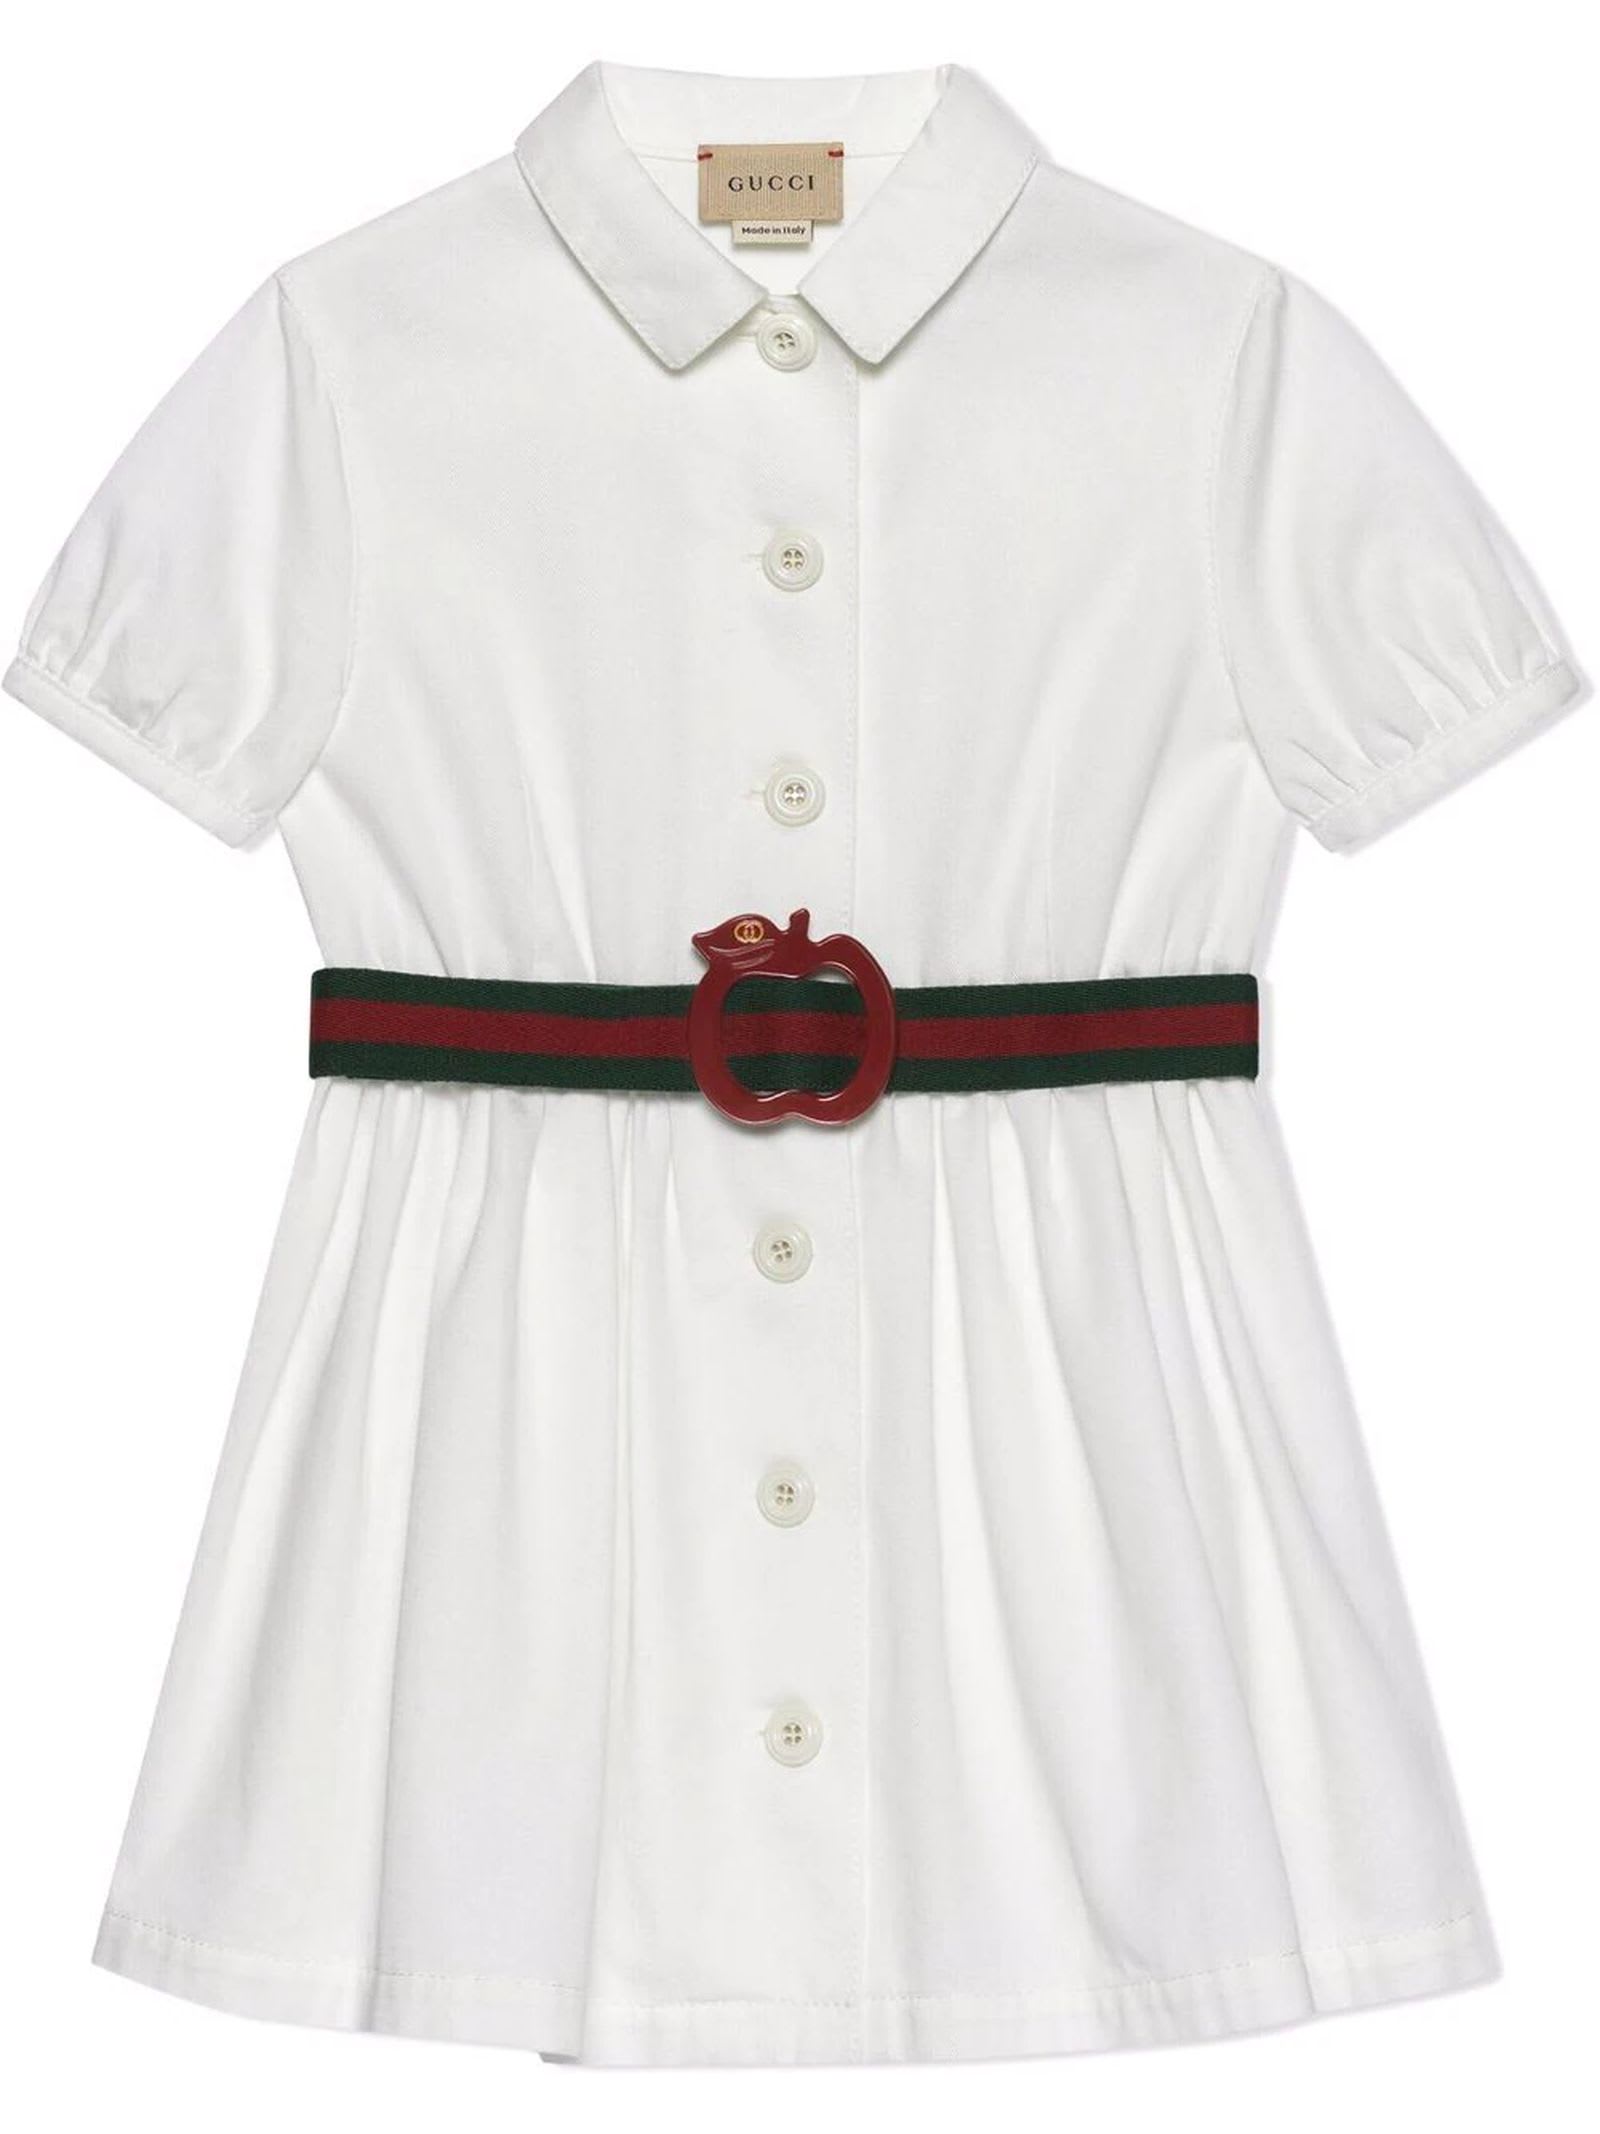 Gucci Childrens Cotton Dress With Apple Buckle